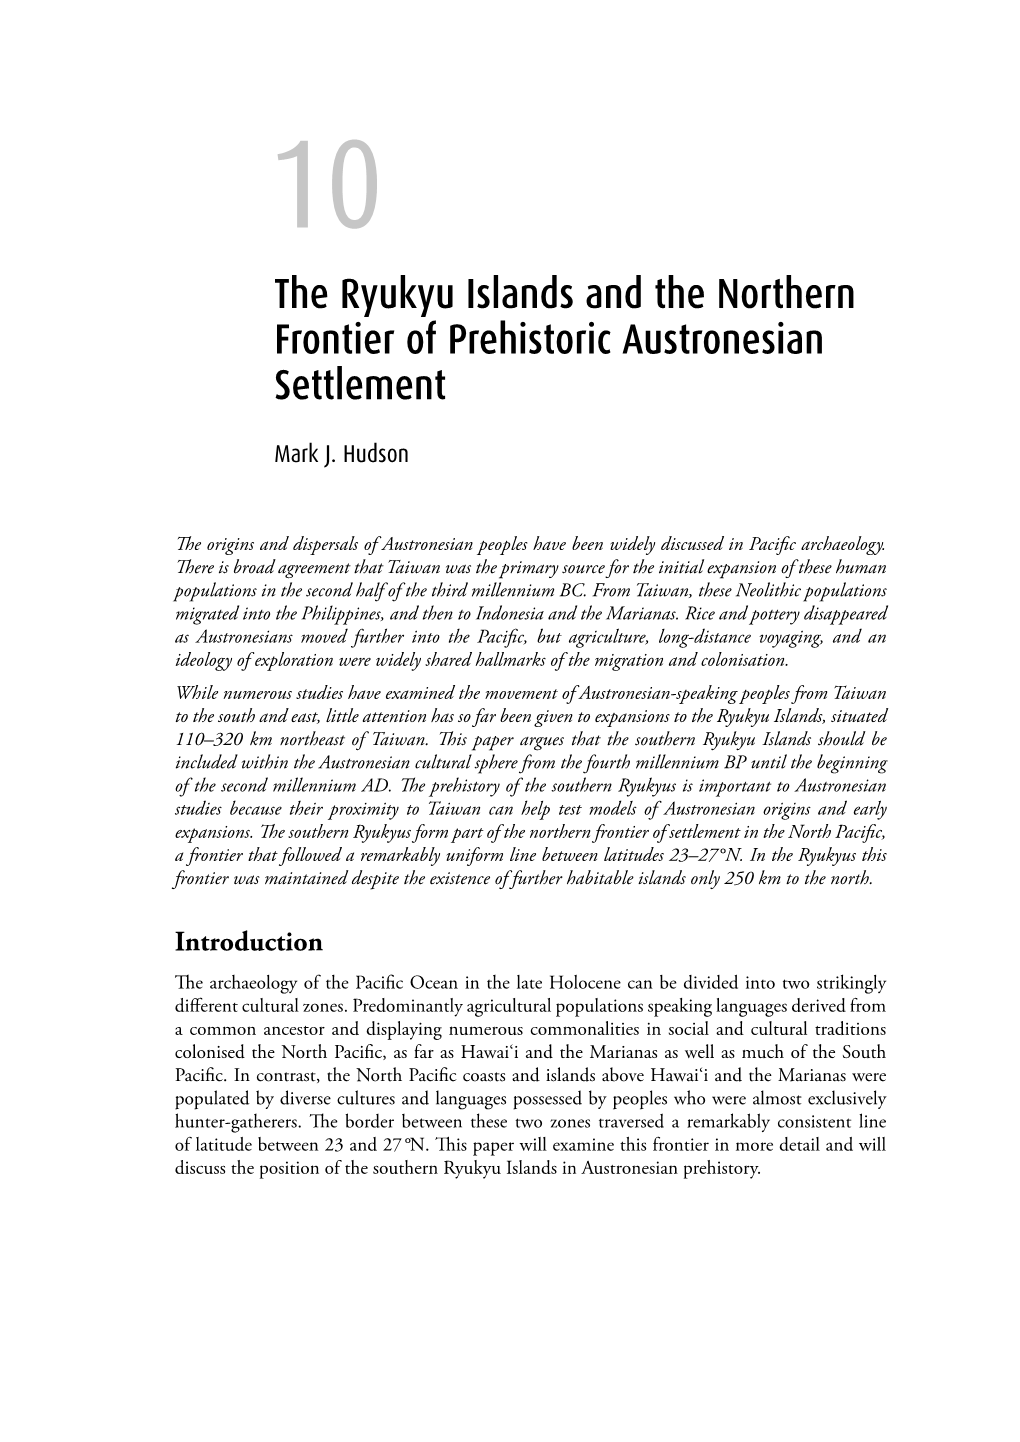 The Ryukyu Islands and the Northern Frontier of Prehistoric Austronesian Settlement